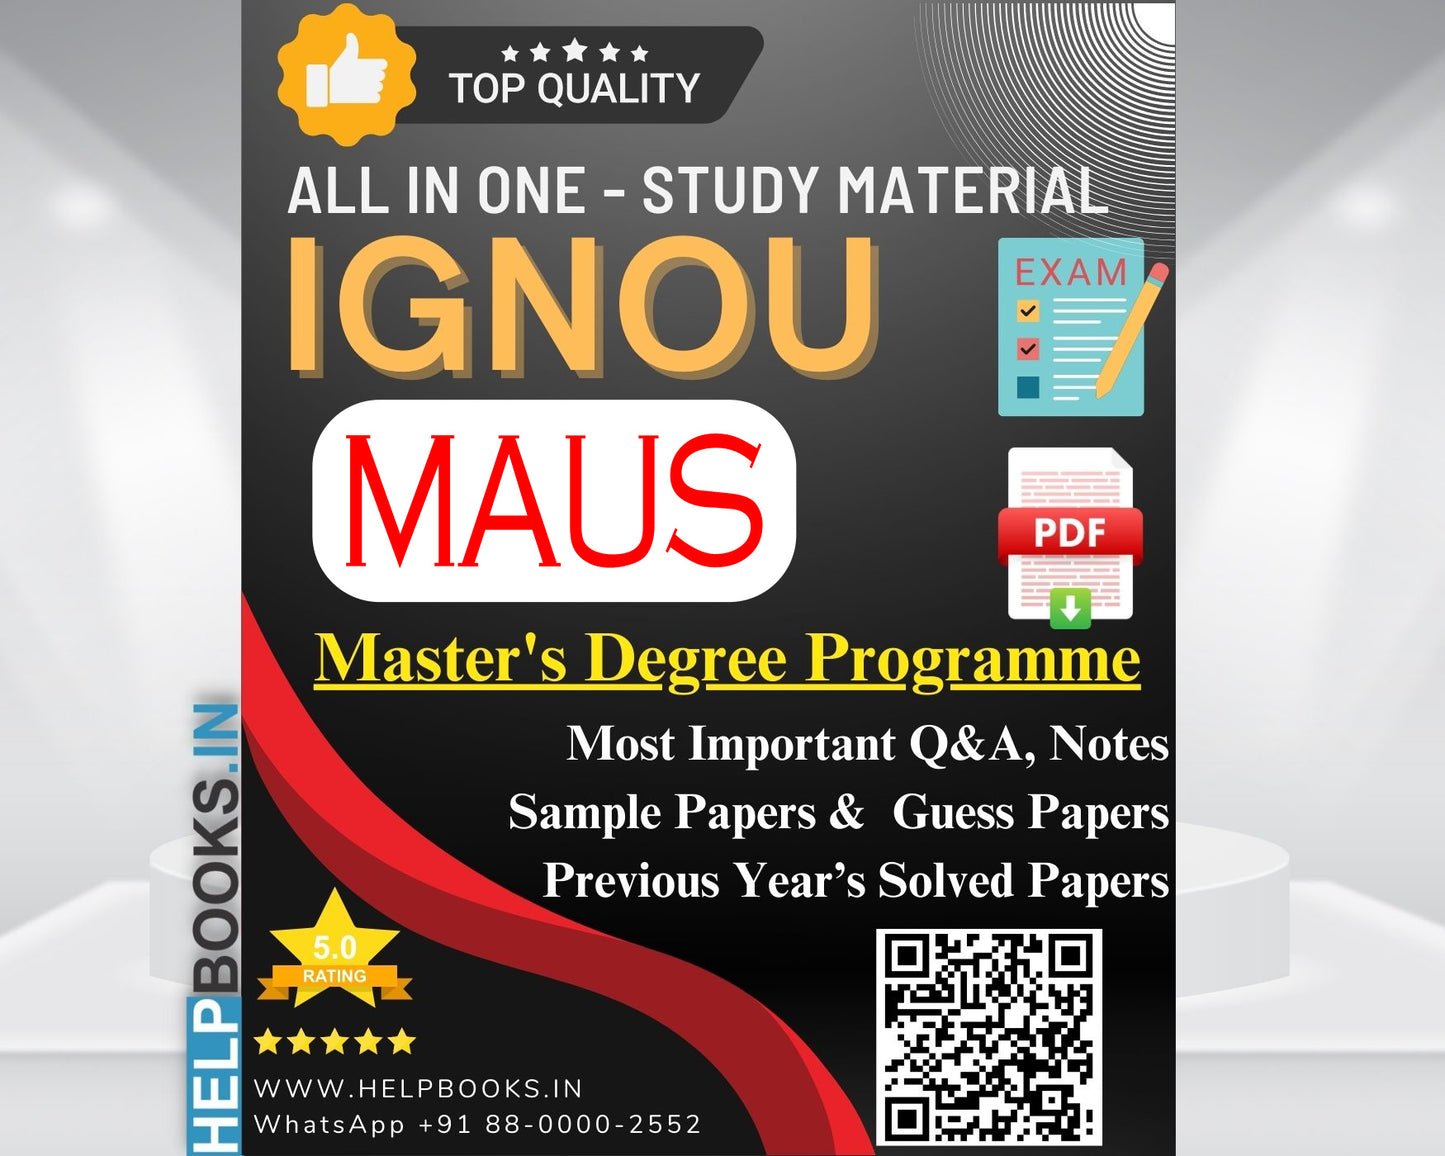 MAUS IGNOU Exam Combo of 10 Solved Papers: 5 Previous Years' Solved Papers & 5 Sample Guess Papers for Master of Arts Urban Studies